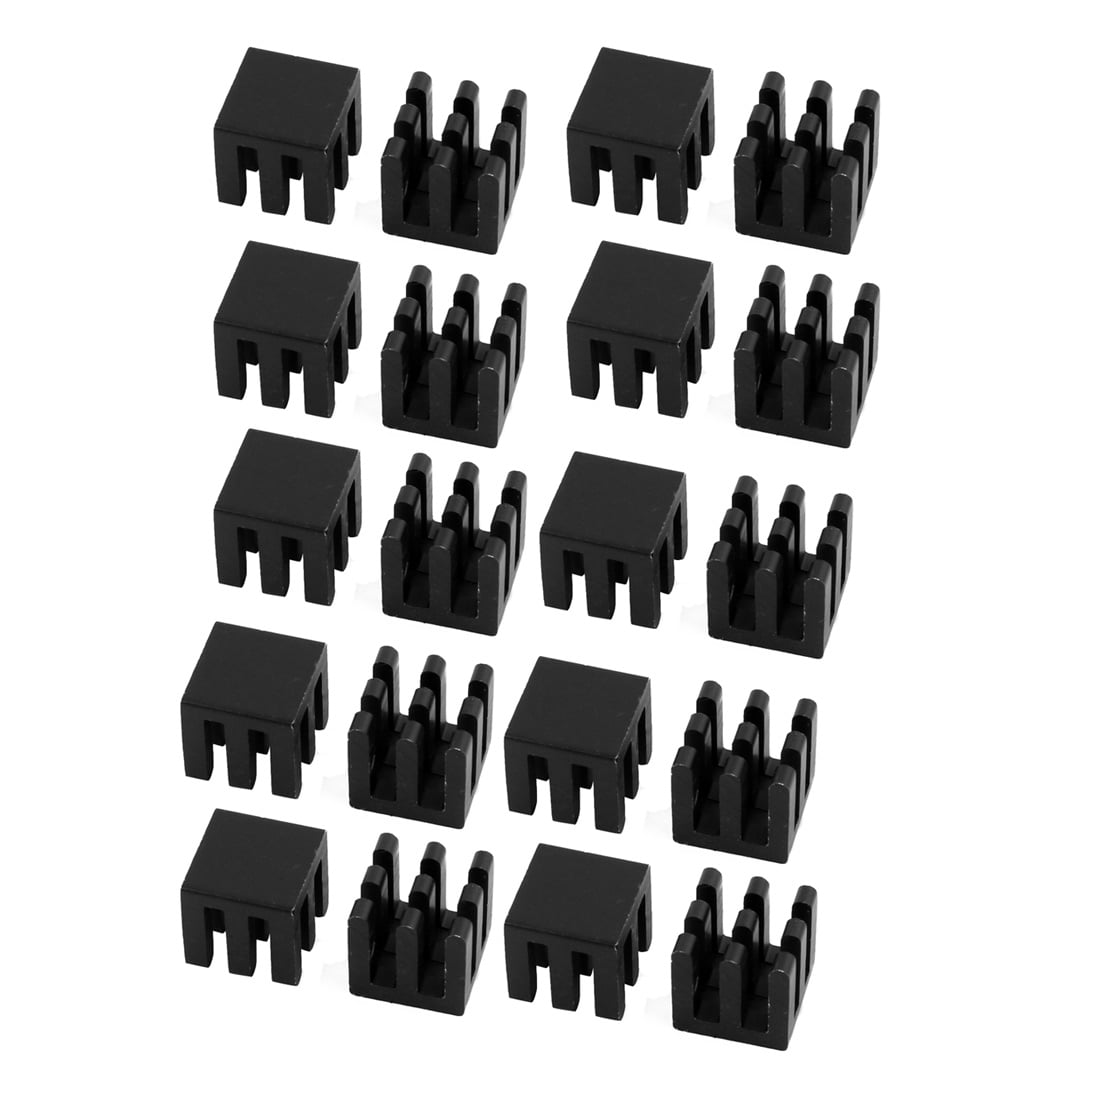 15pcs 10*10*10mm Aluminum Heatsink Cool For IC CHIPs With Thermal Adhesive Pad 